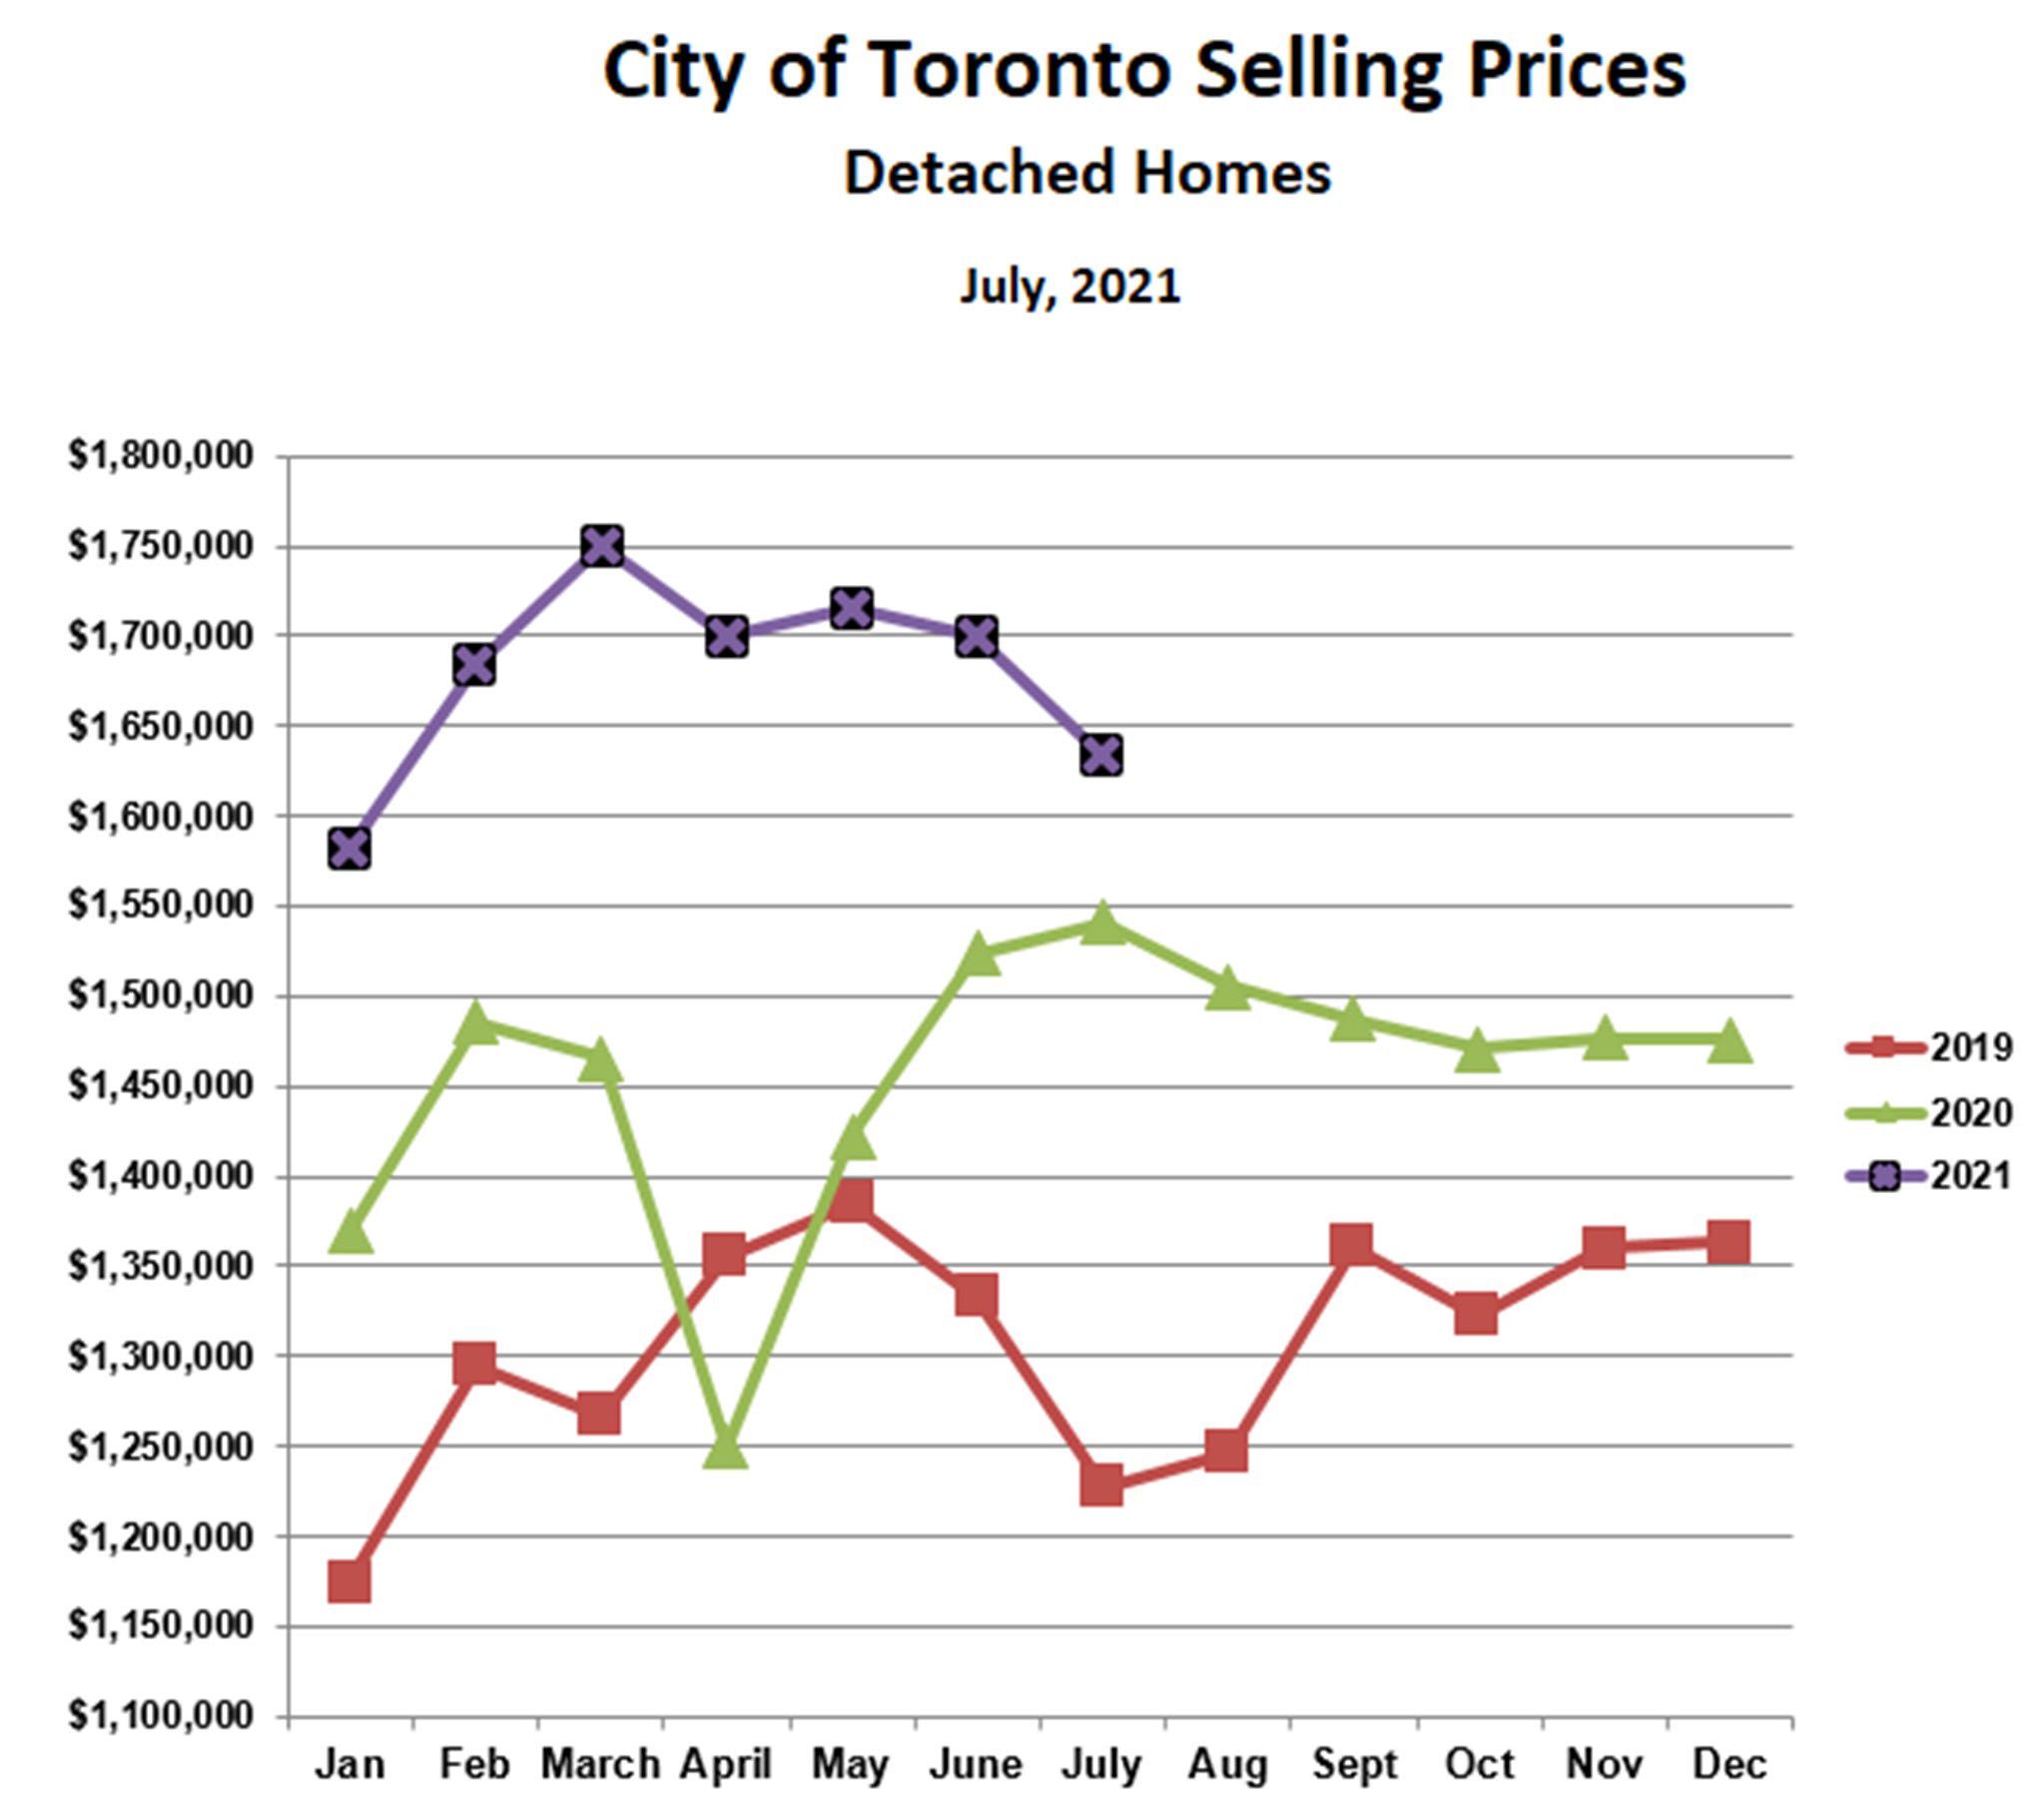 Prices for detached homes